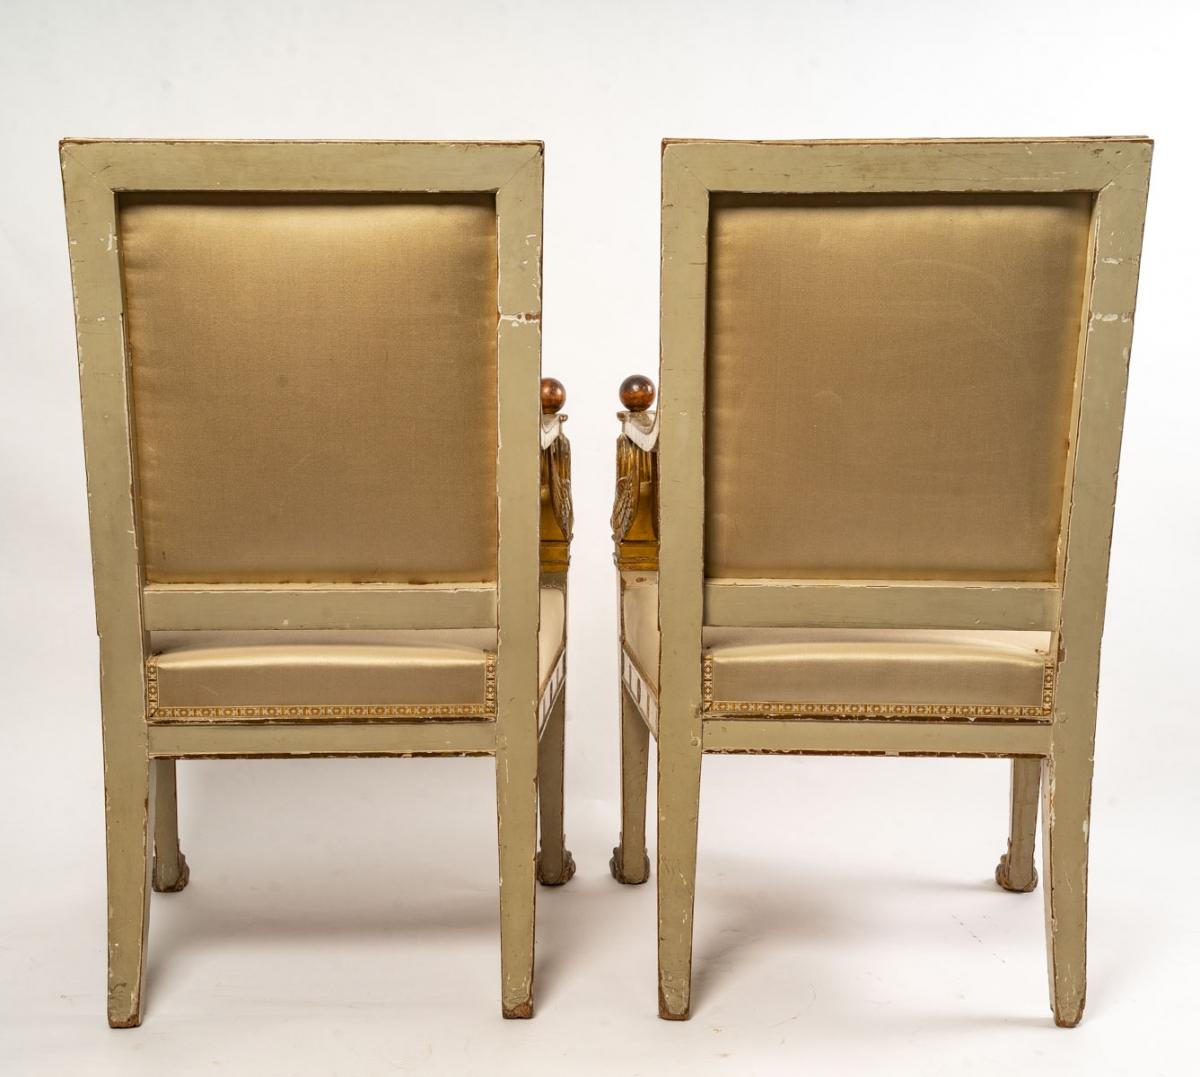 Gilt Pair of Armchairs, the First Empire Period, circa 1802